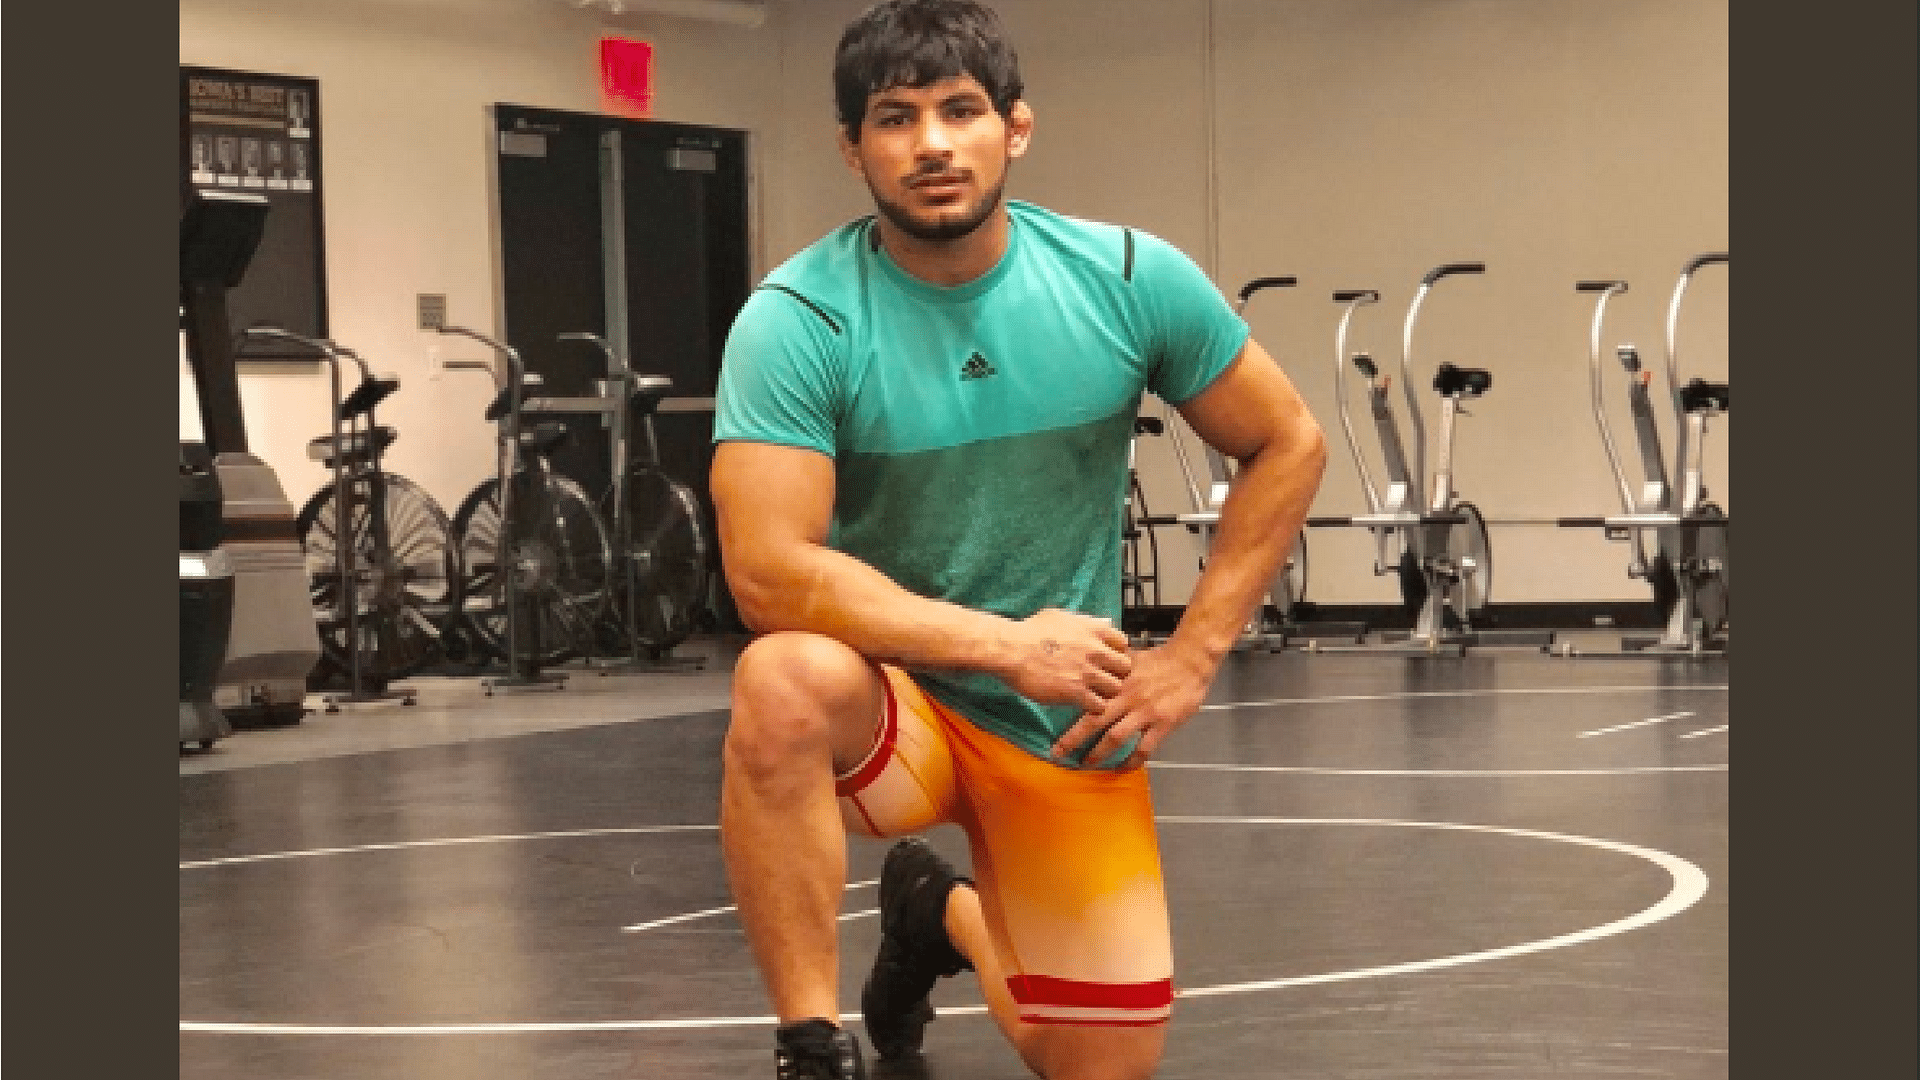 Pawan Kumar has qualified for the Asian Games, and is fulfilling his potential independently from star wrestler and beloved wife Geeta Phogat.